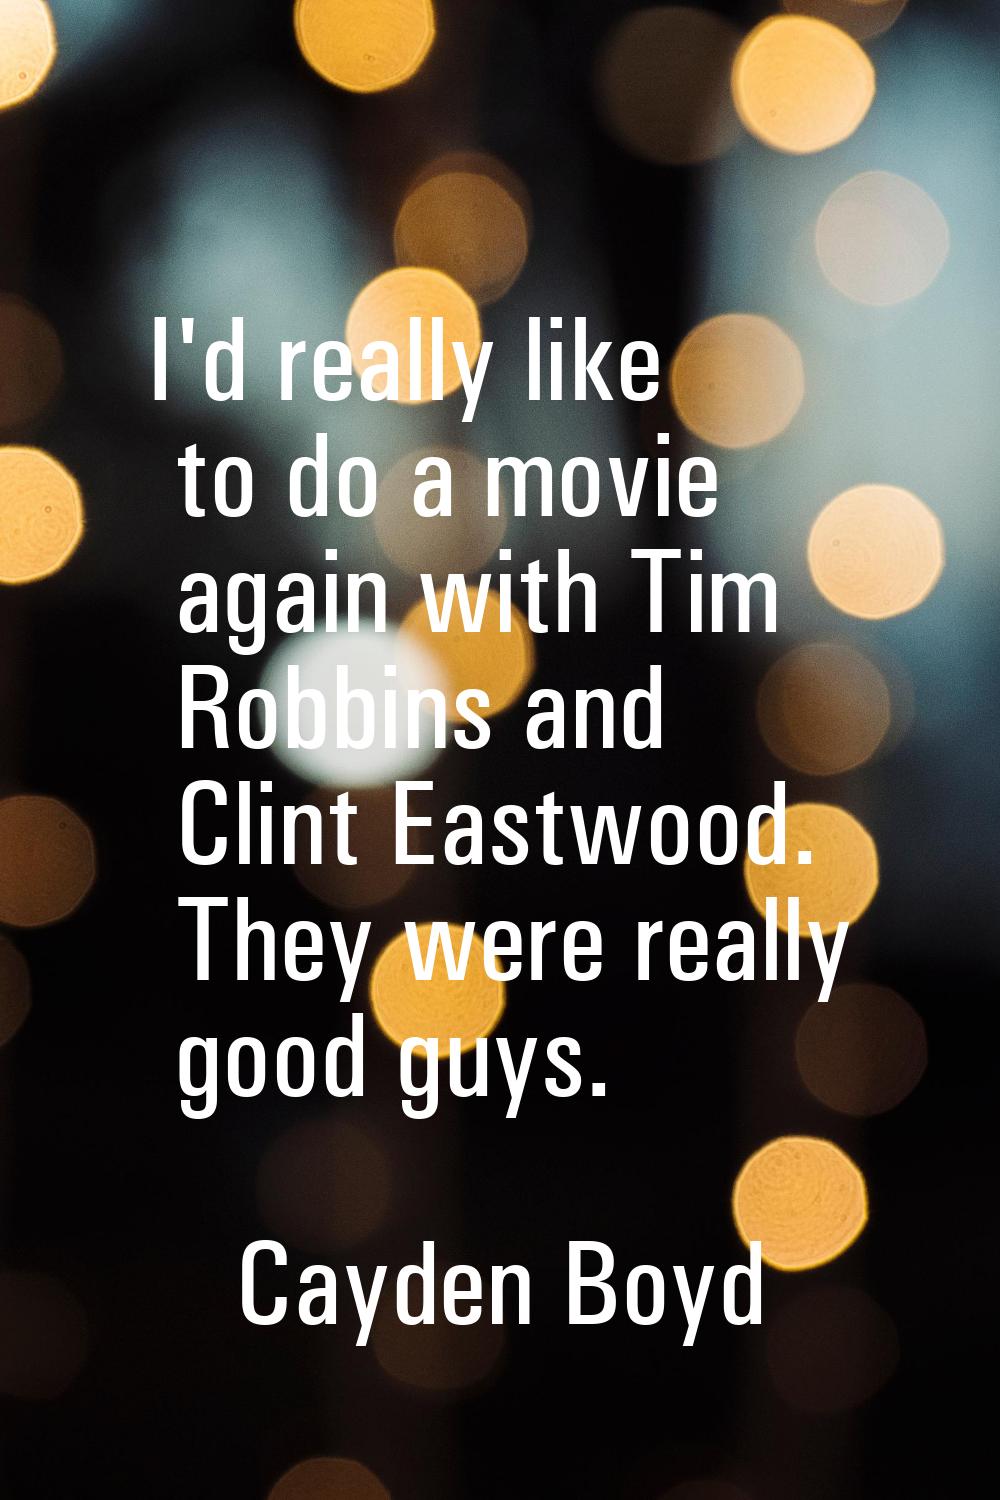 I'd really like to do a movie again with Tim Robbins and Clint Eastwood. They were really good guys